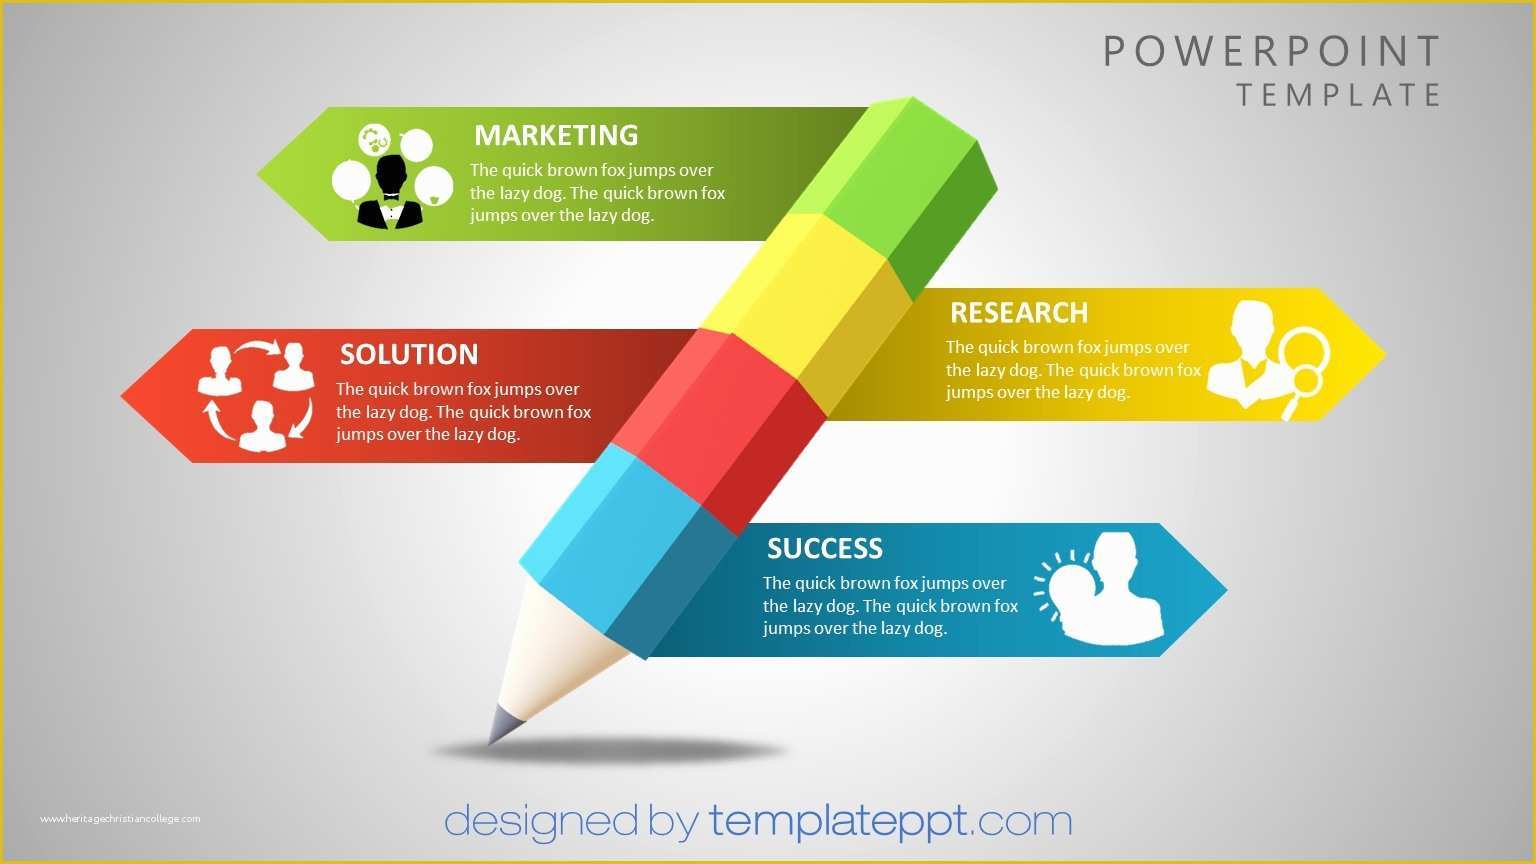 Professional Ppt Templates Free Download Of Best Ppt Templates Free Download 2018